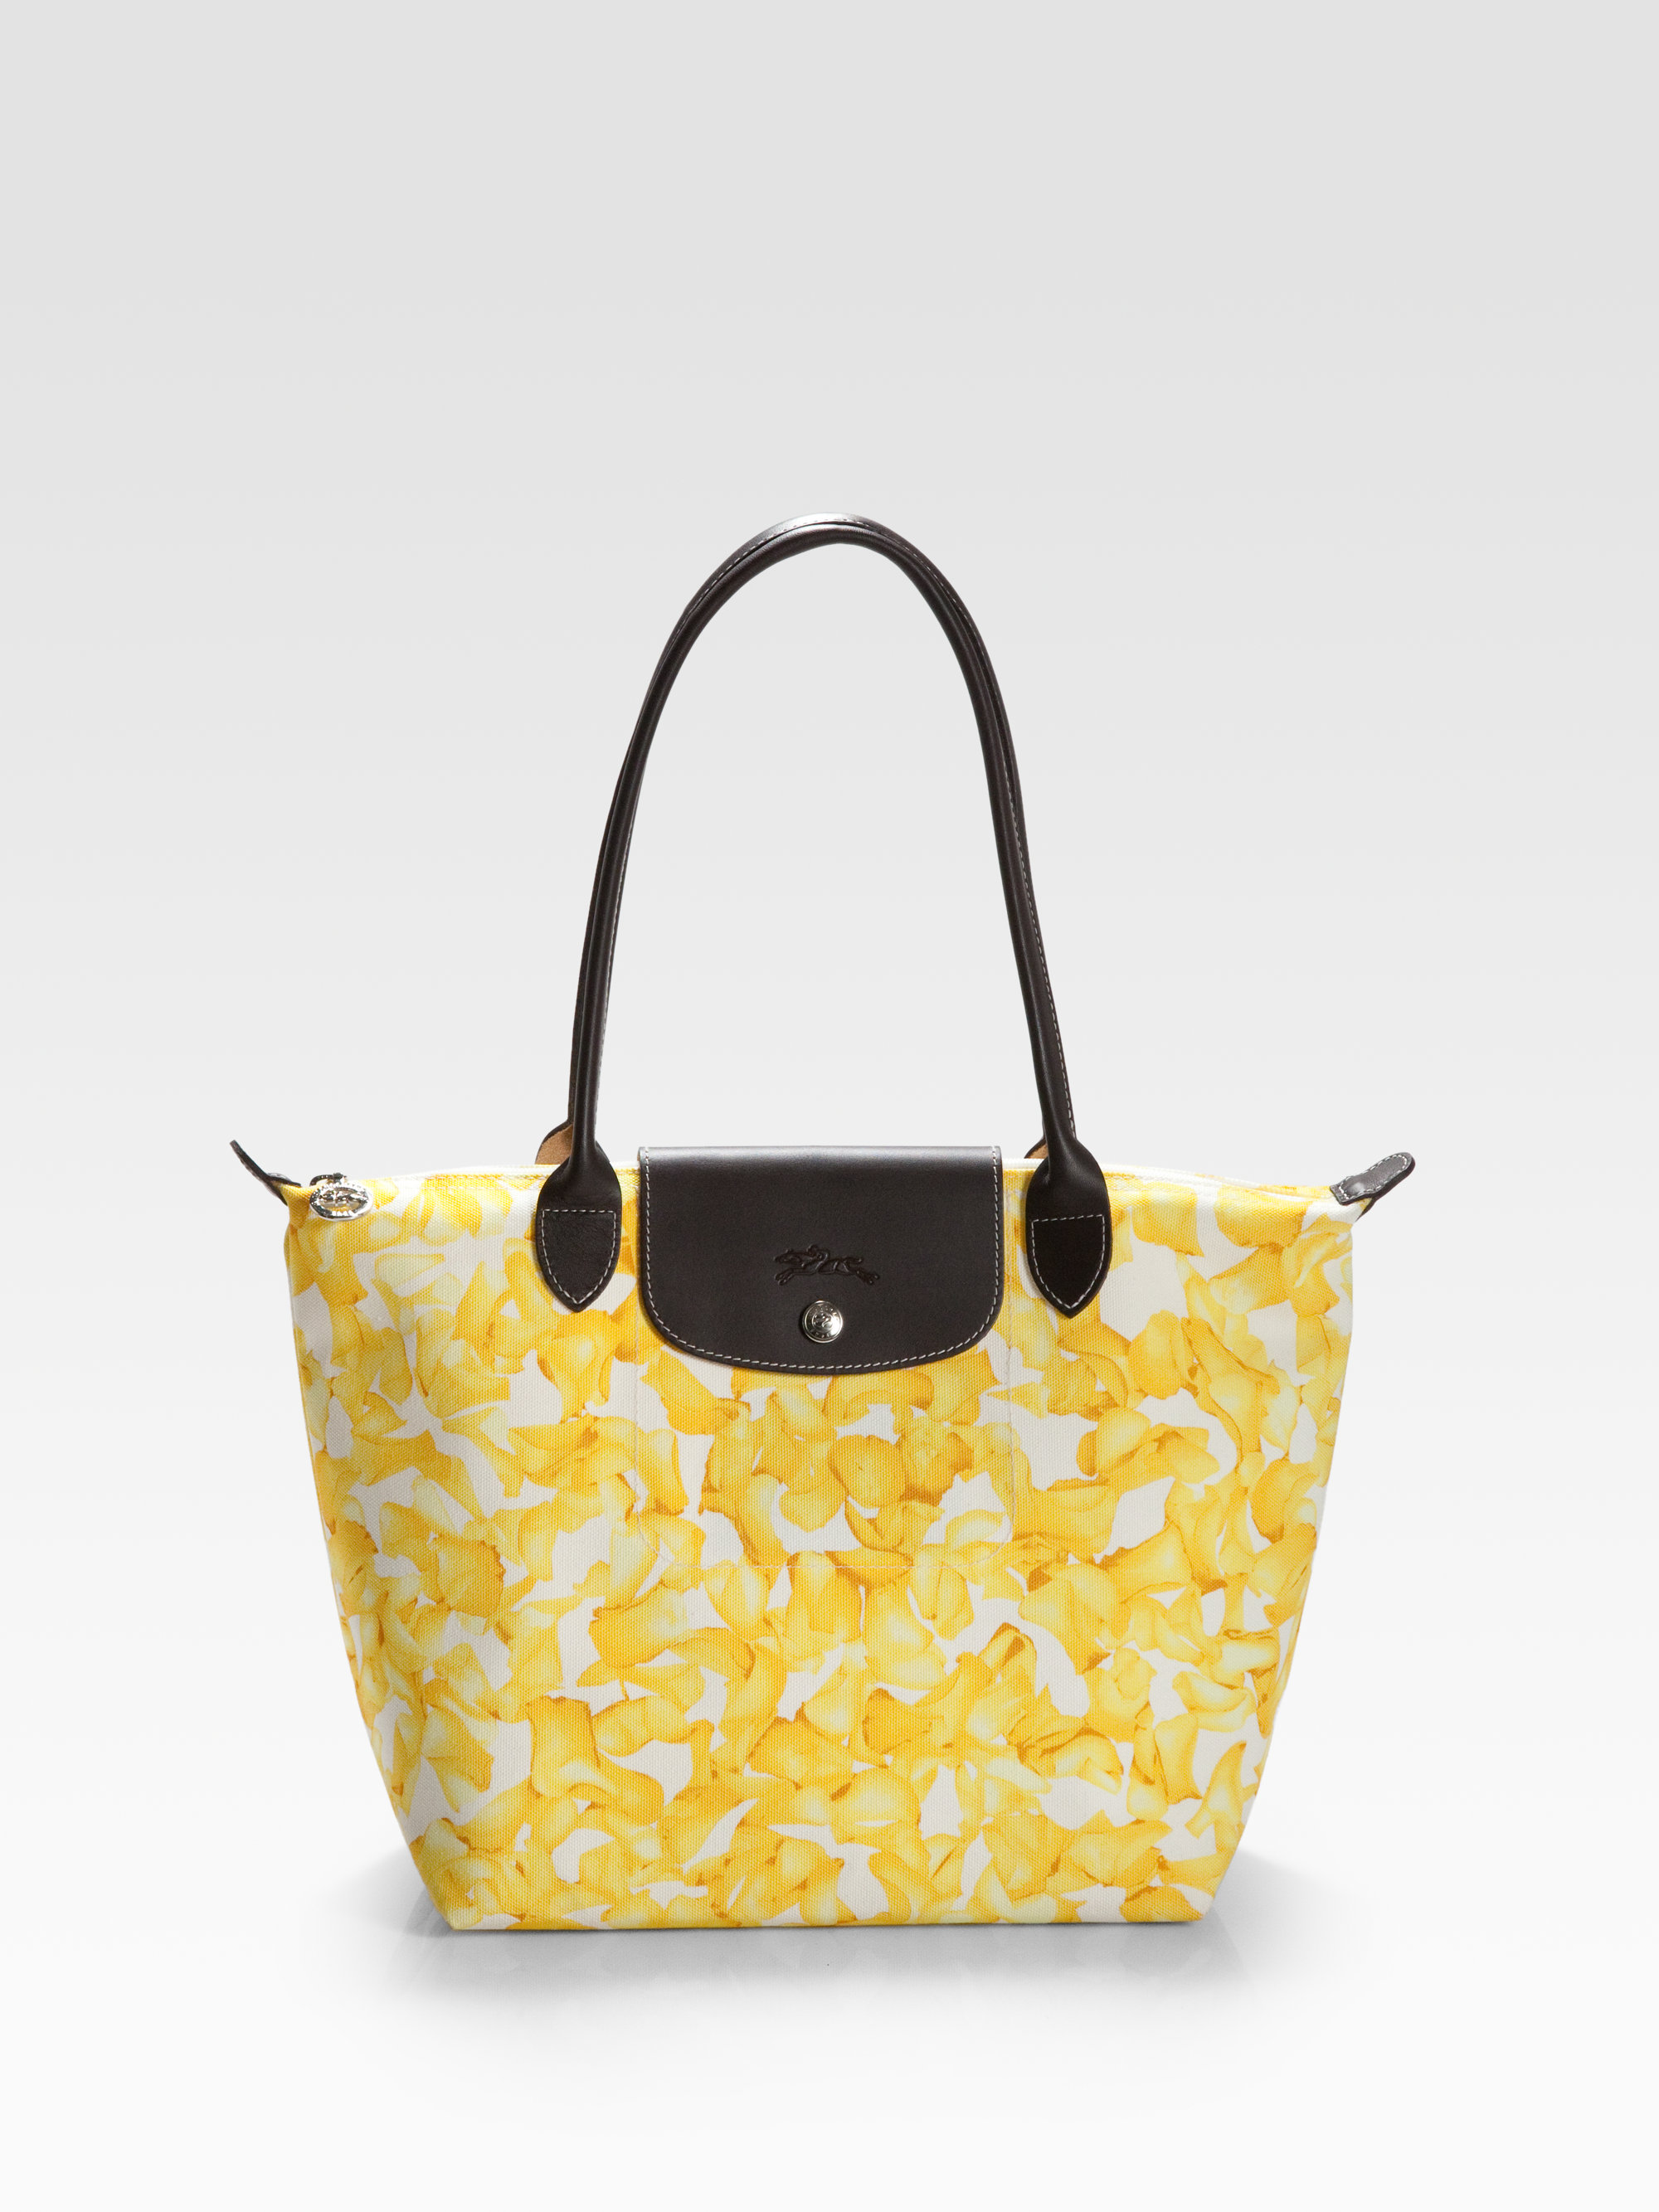 Lyst - Longchamp Darshan Small Tote in Yellow